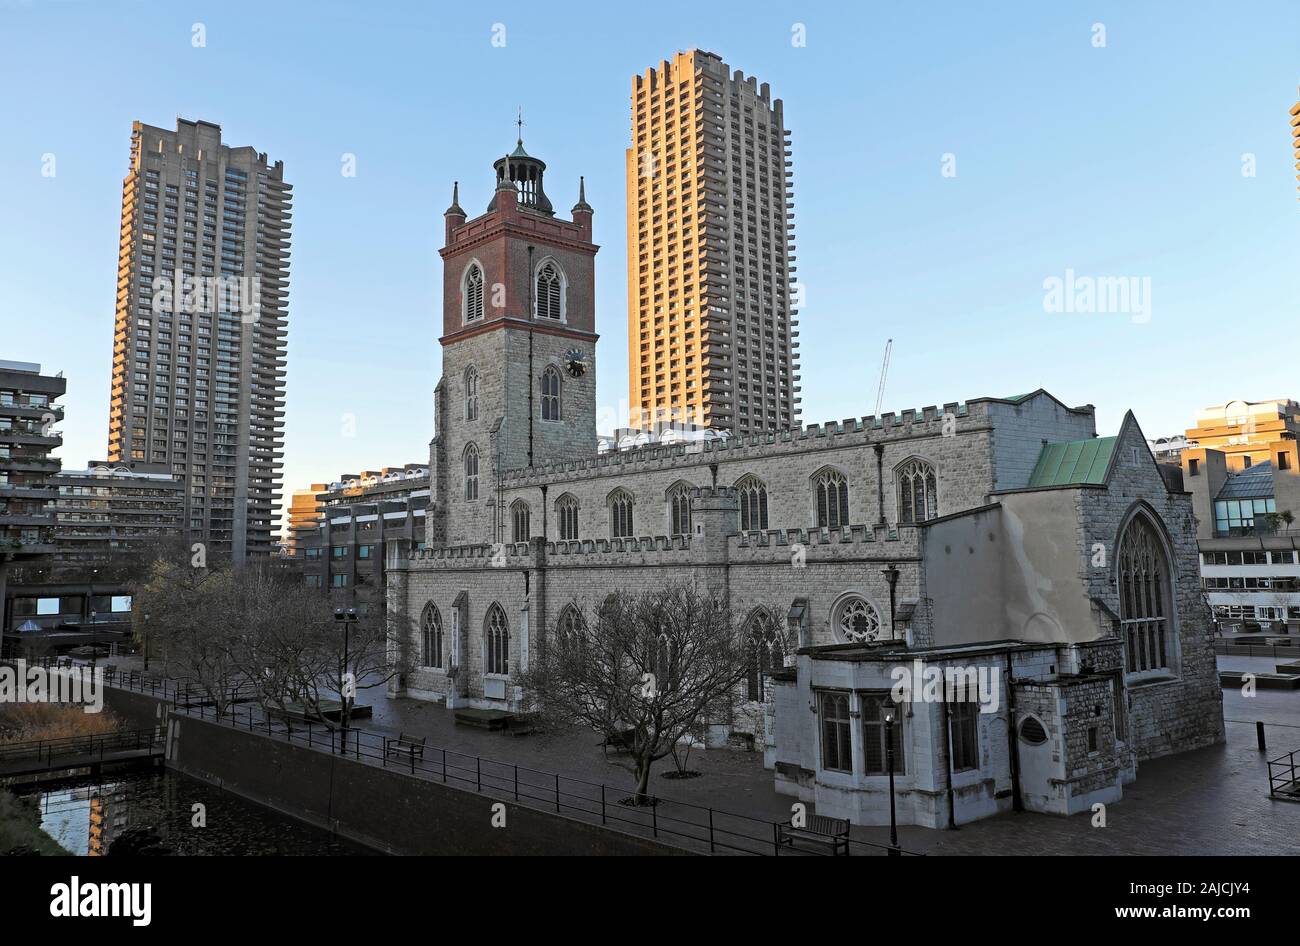 A view of St Giles Cripplegate church and Barbican residential towers in the City of London EC2 England  UK  KATHY DEWITT Stock Photo